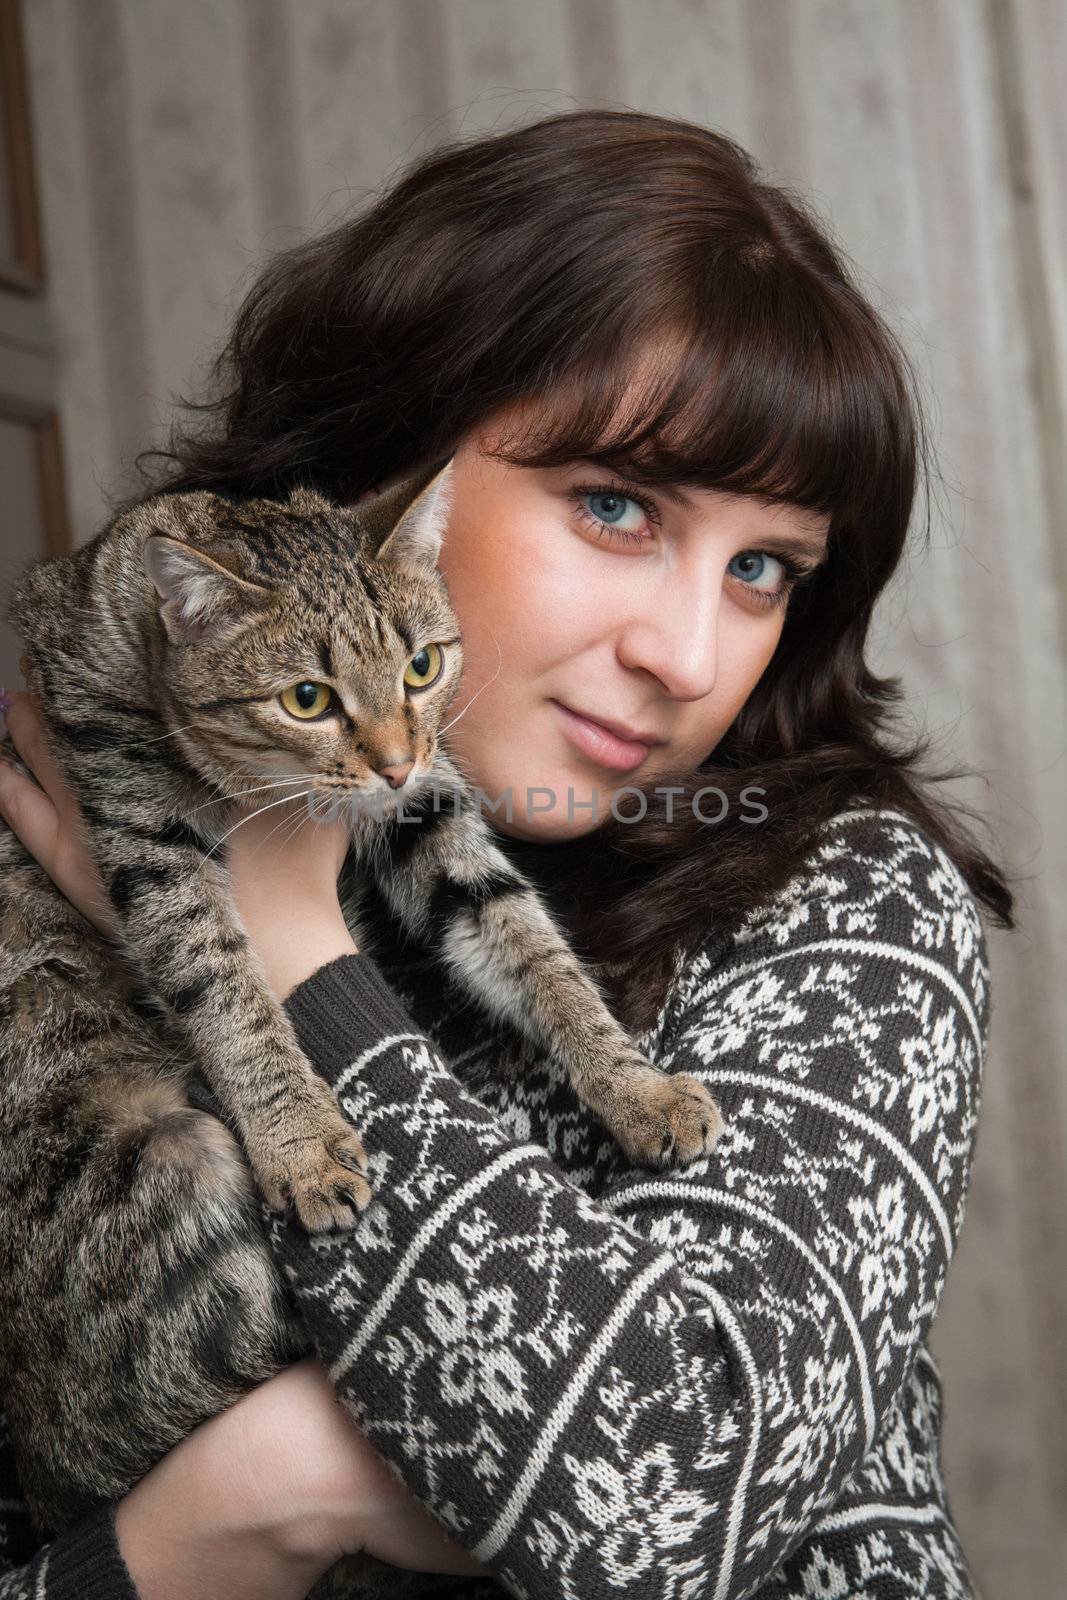 The girl holds on hands of a grey cat